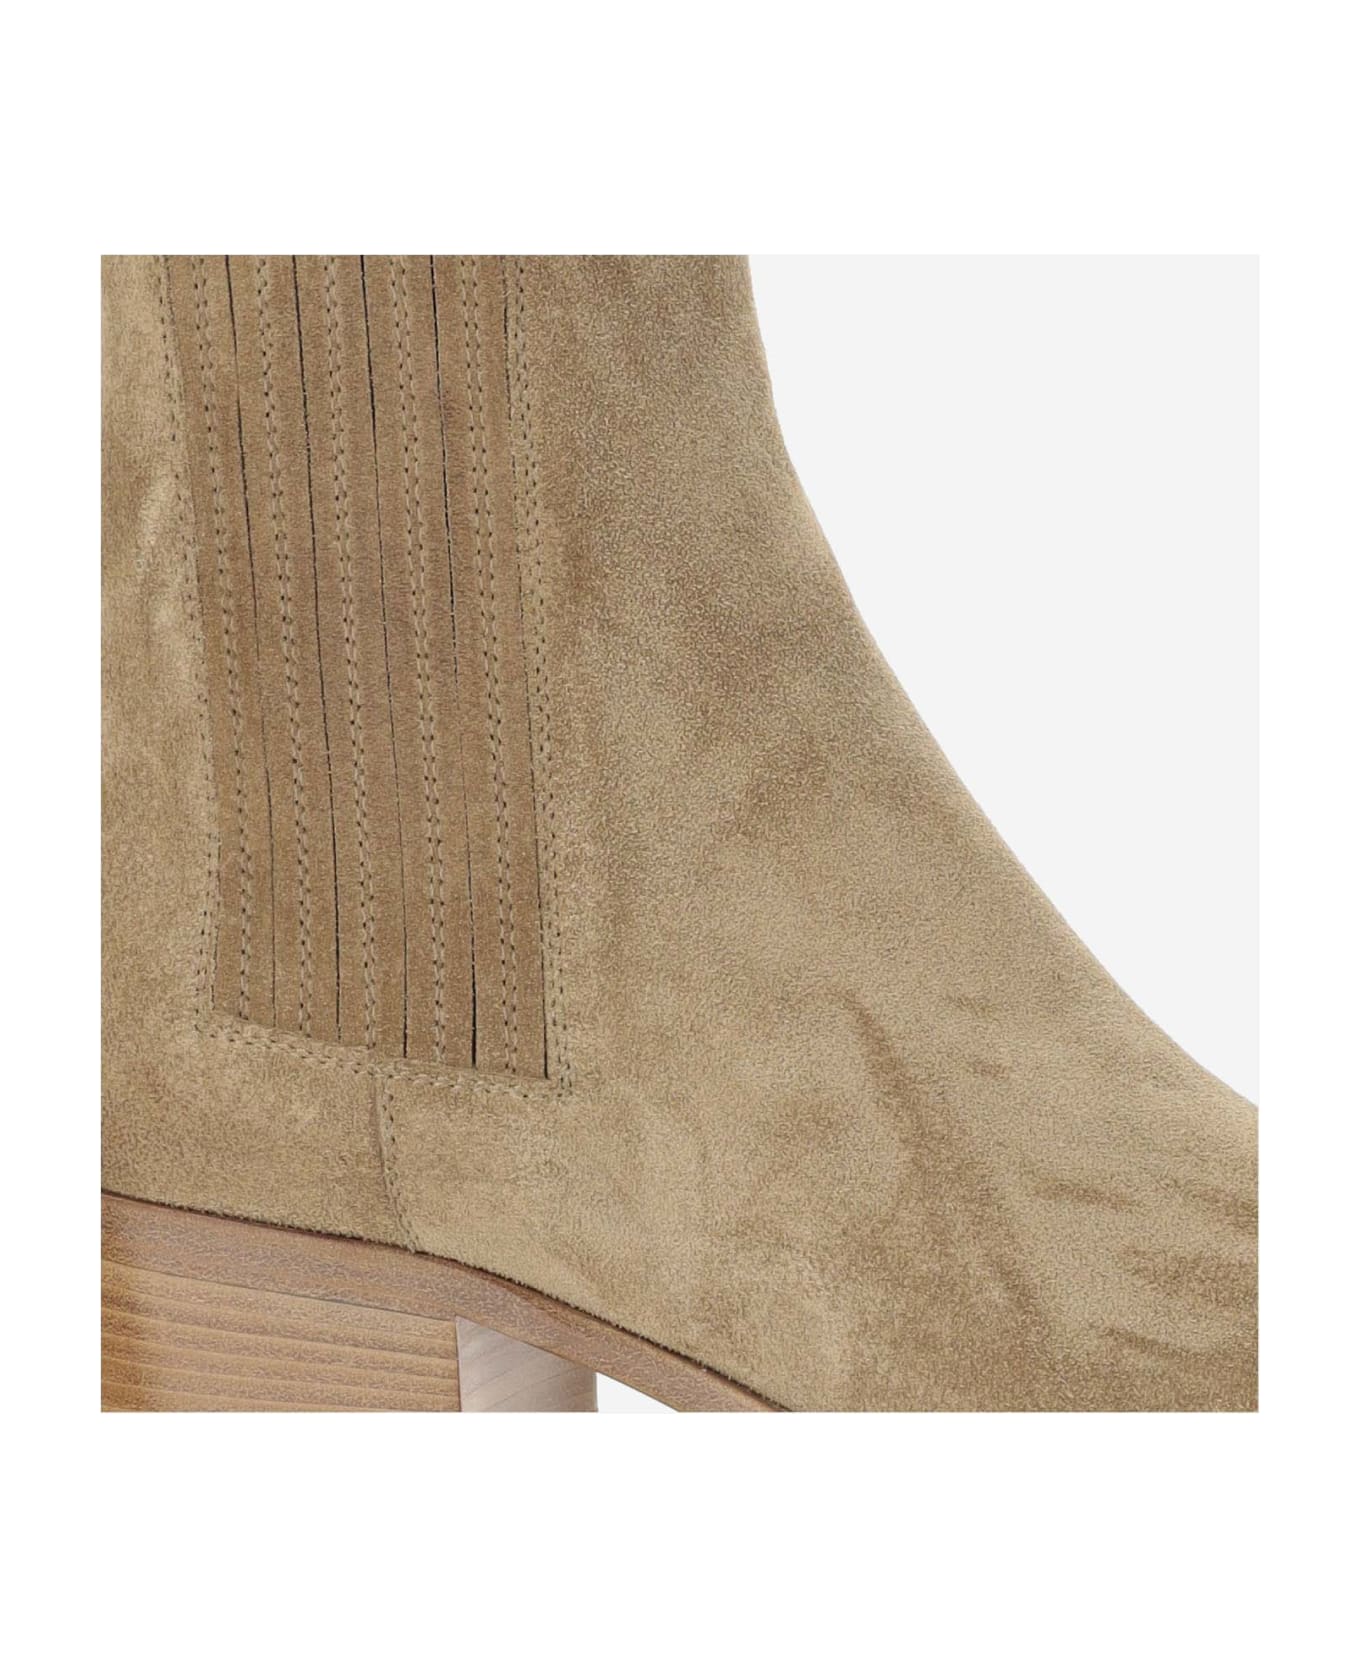 Sartore Suede Ankle Boots - Beige ブーツ